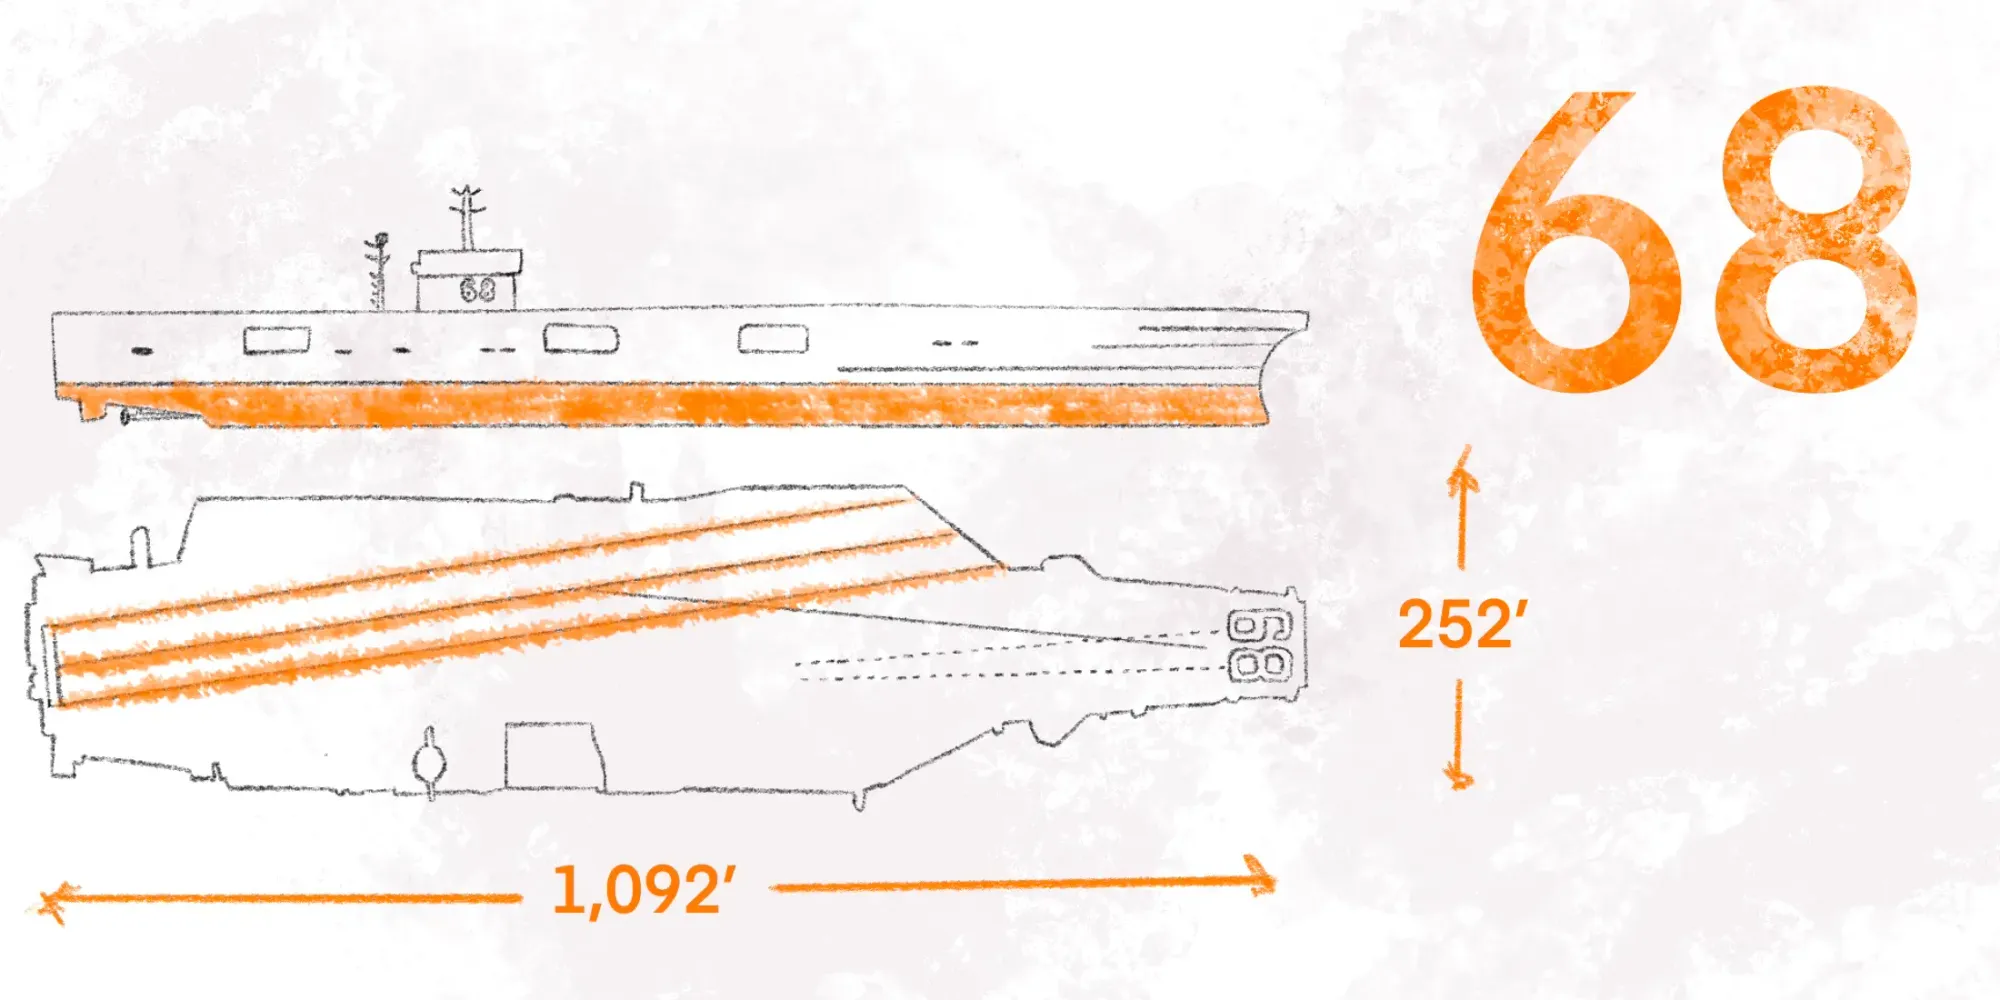 EExplained: Aircraft Carriers